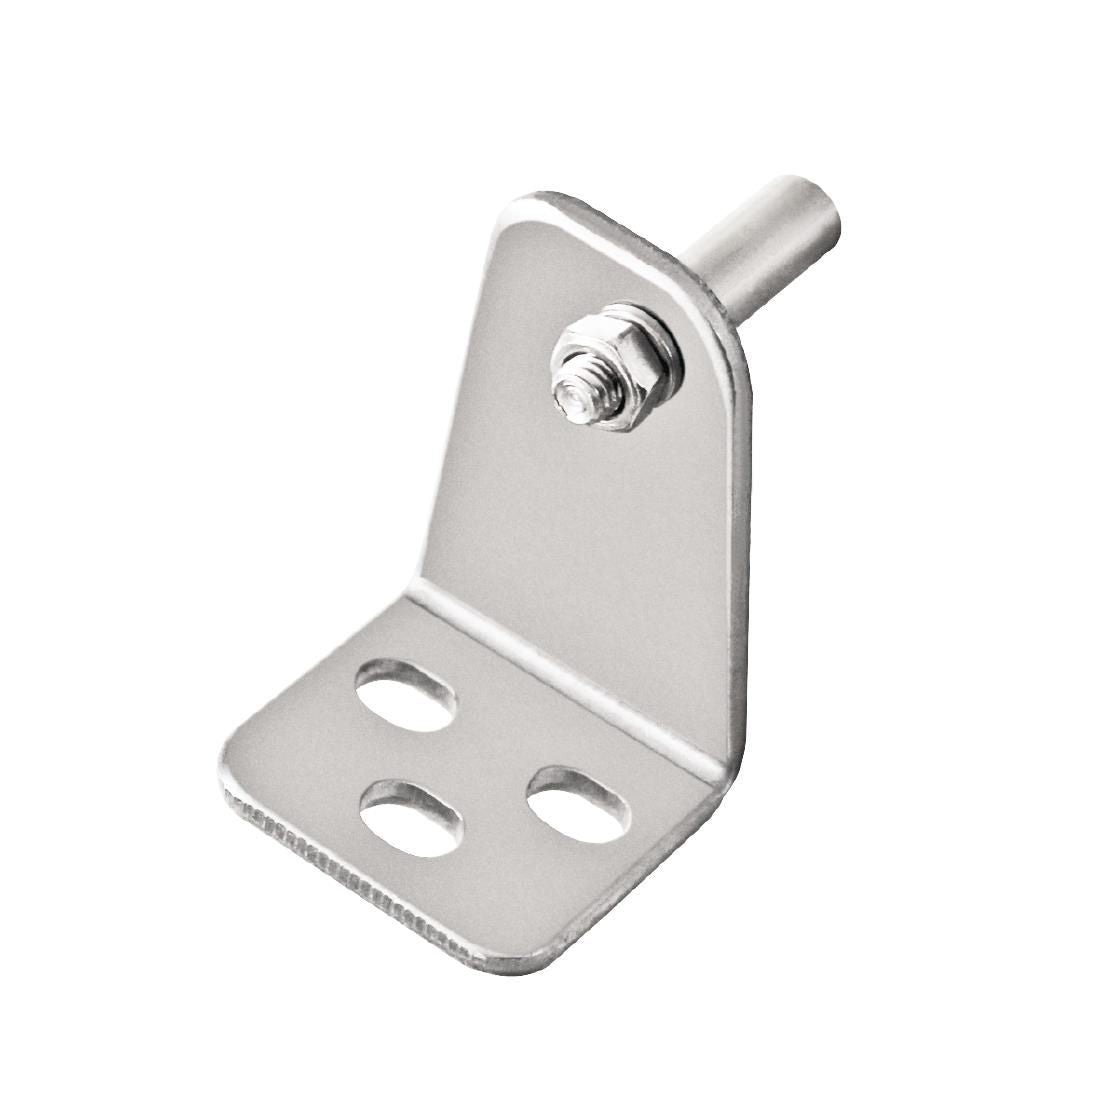 (Availability 27/01/24) AB307 Replacement Down Hinge Right for CL108 CL109 CN402 CT425 G603 G604 G605 G606 G607 G622 U636 JD Catering Equipment Solutions Ltd